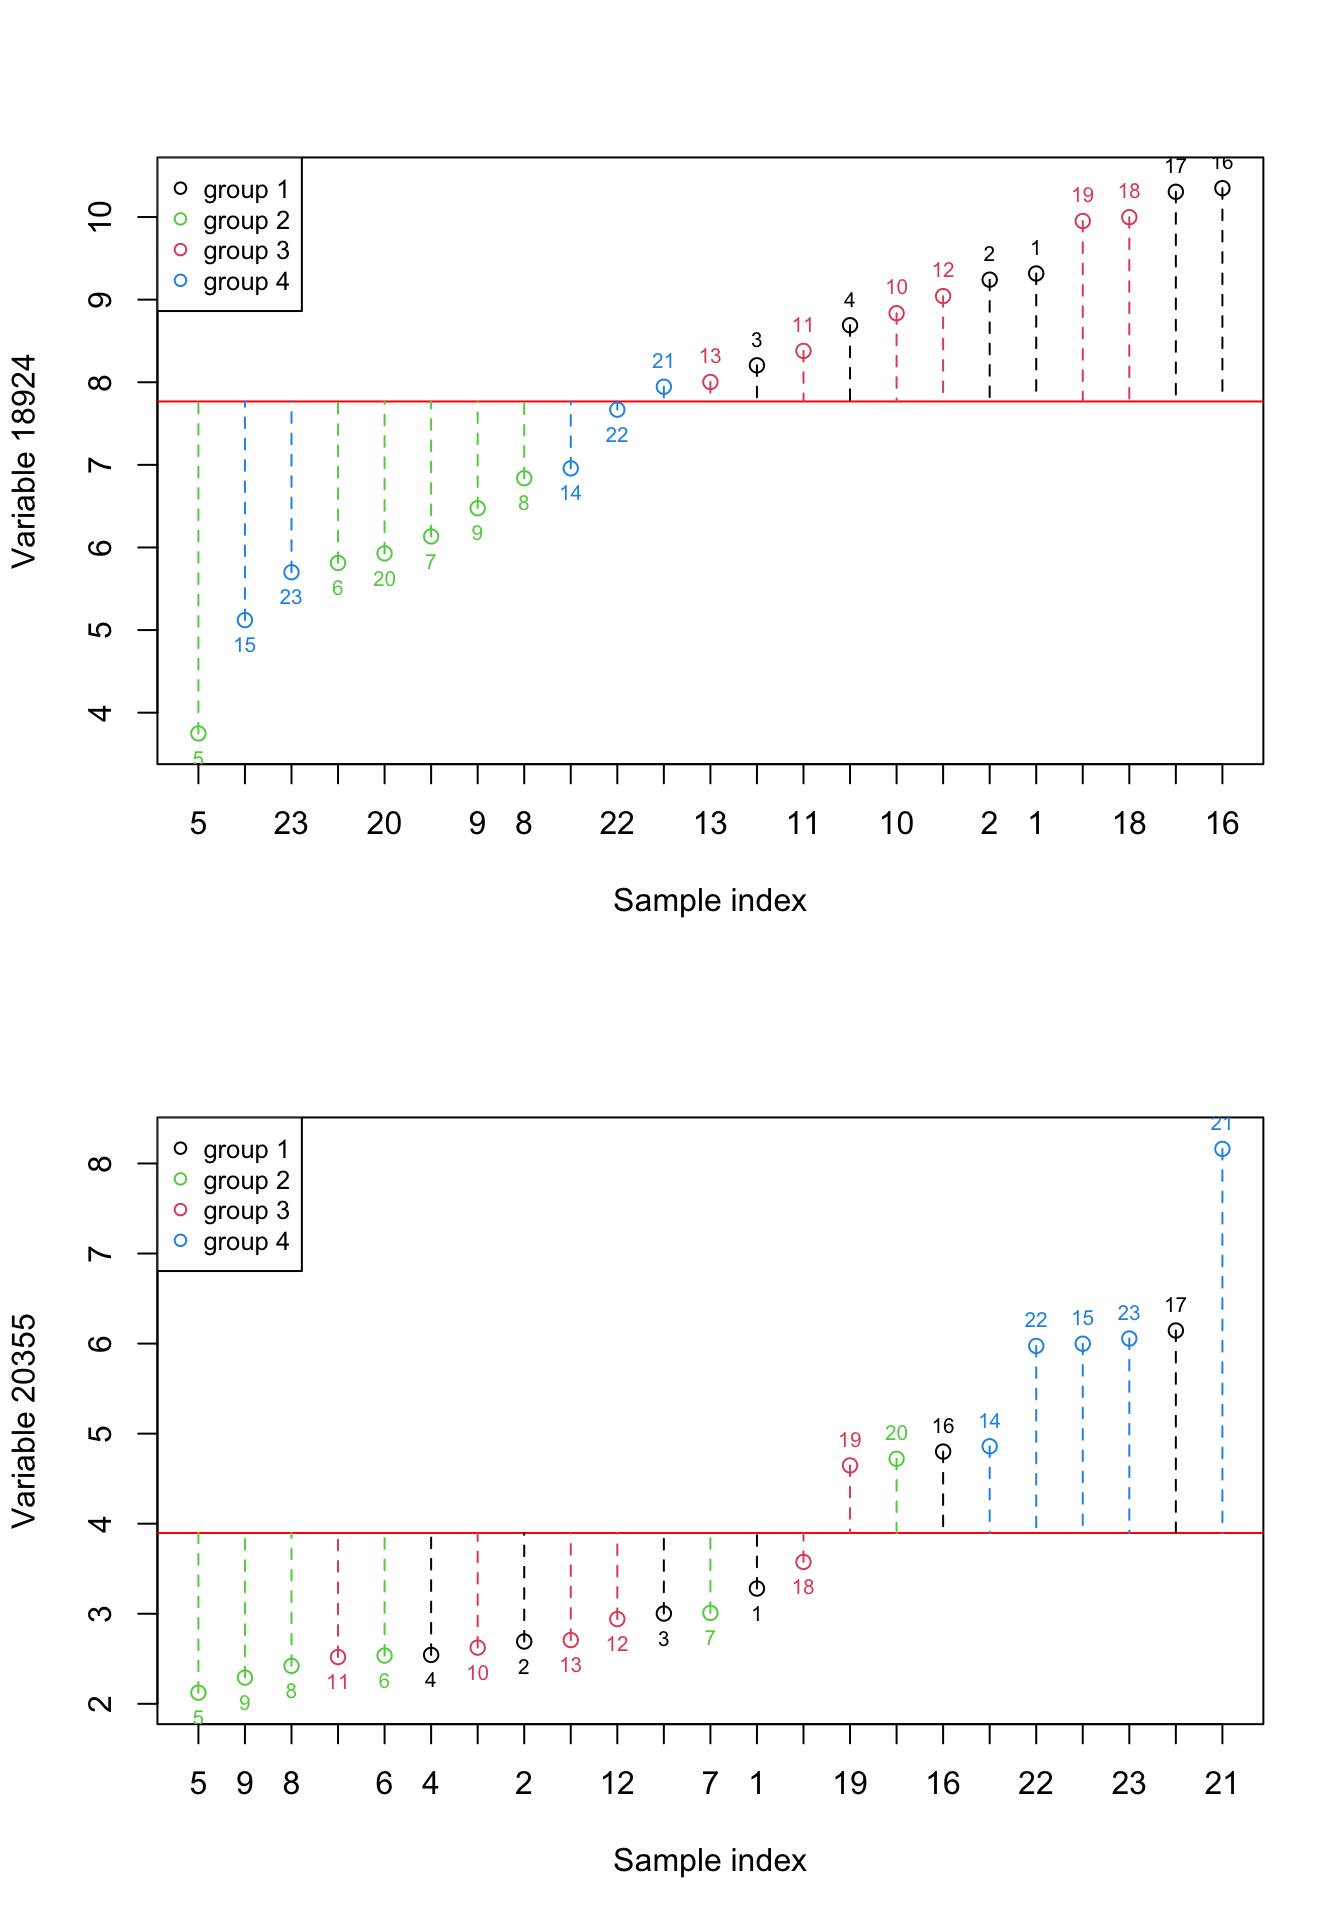 Here, we select two previous variables and show how the data is spread around the mean. The red numbers show the index of each sample. The red line shows the mean and the dashed lines show the distance between each observation and mean. Please note that the samples are reordered based on the expression. the color of points show the grouping of samples